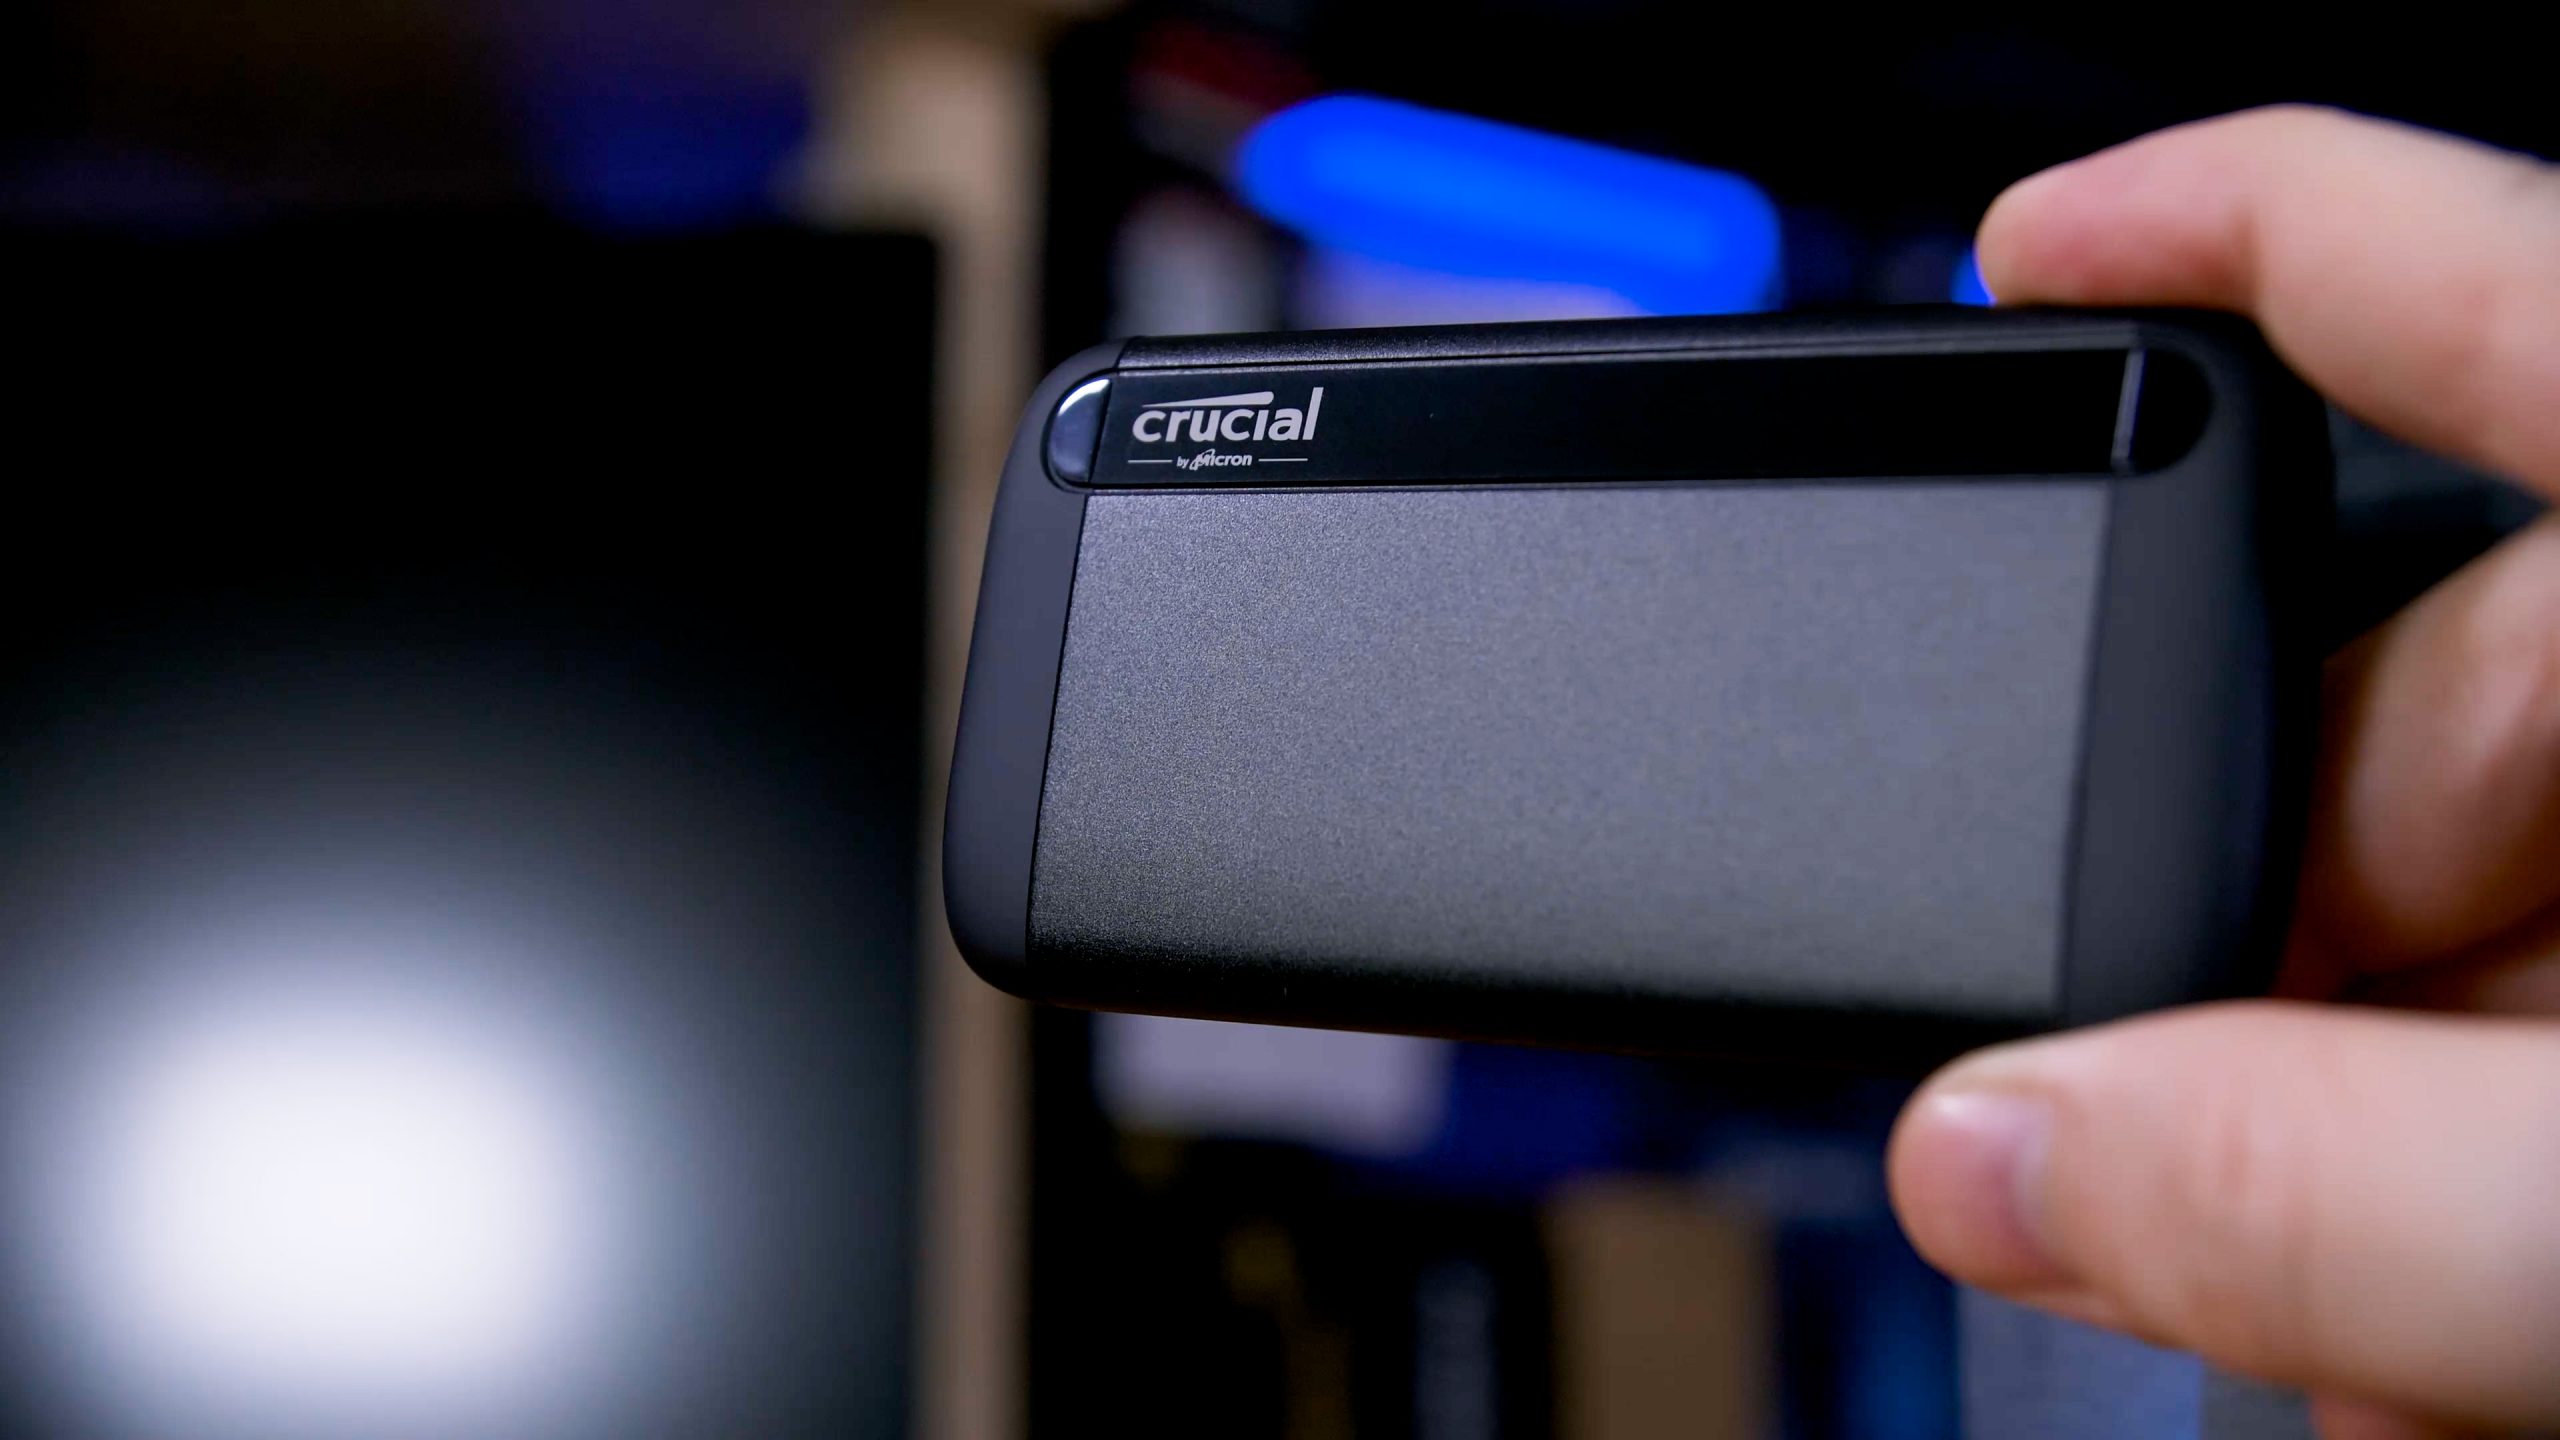 Crucial X8 Portable SSD 2022 review